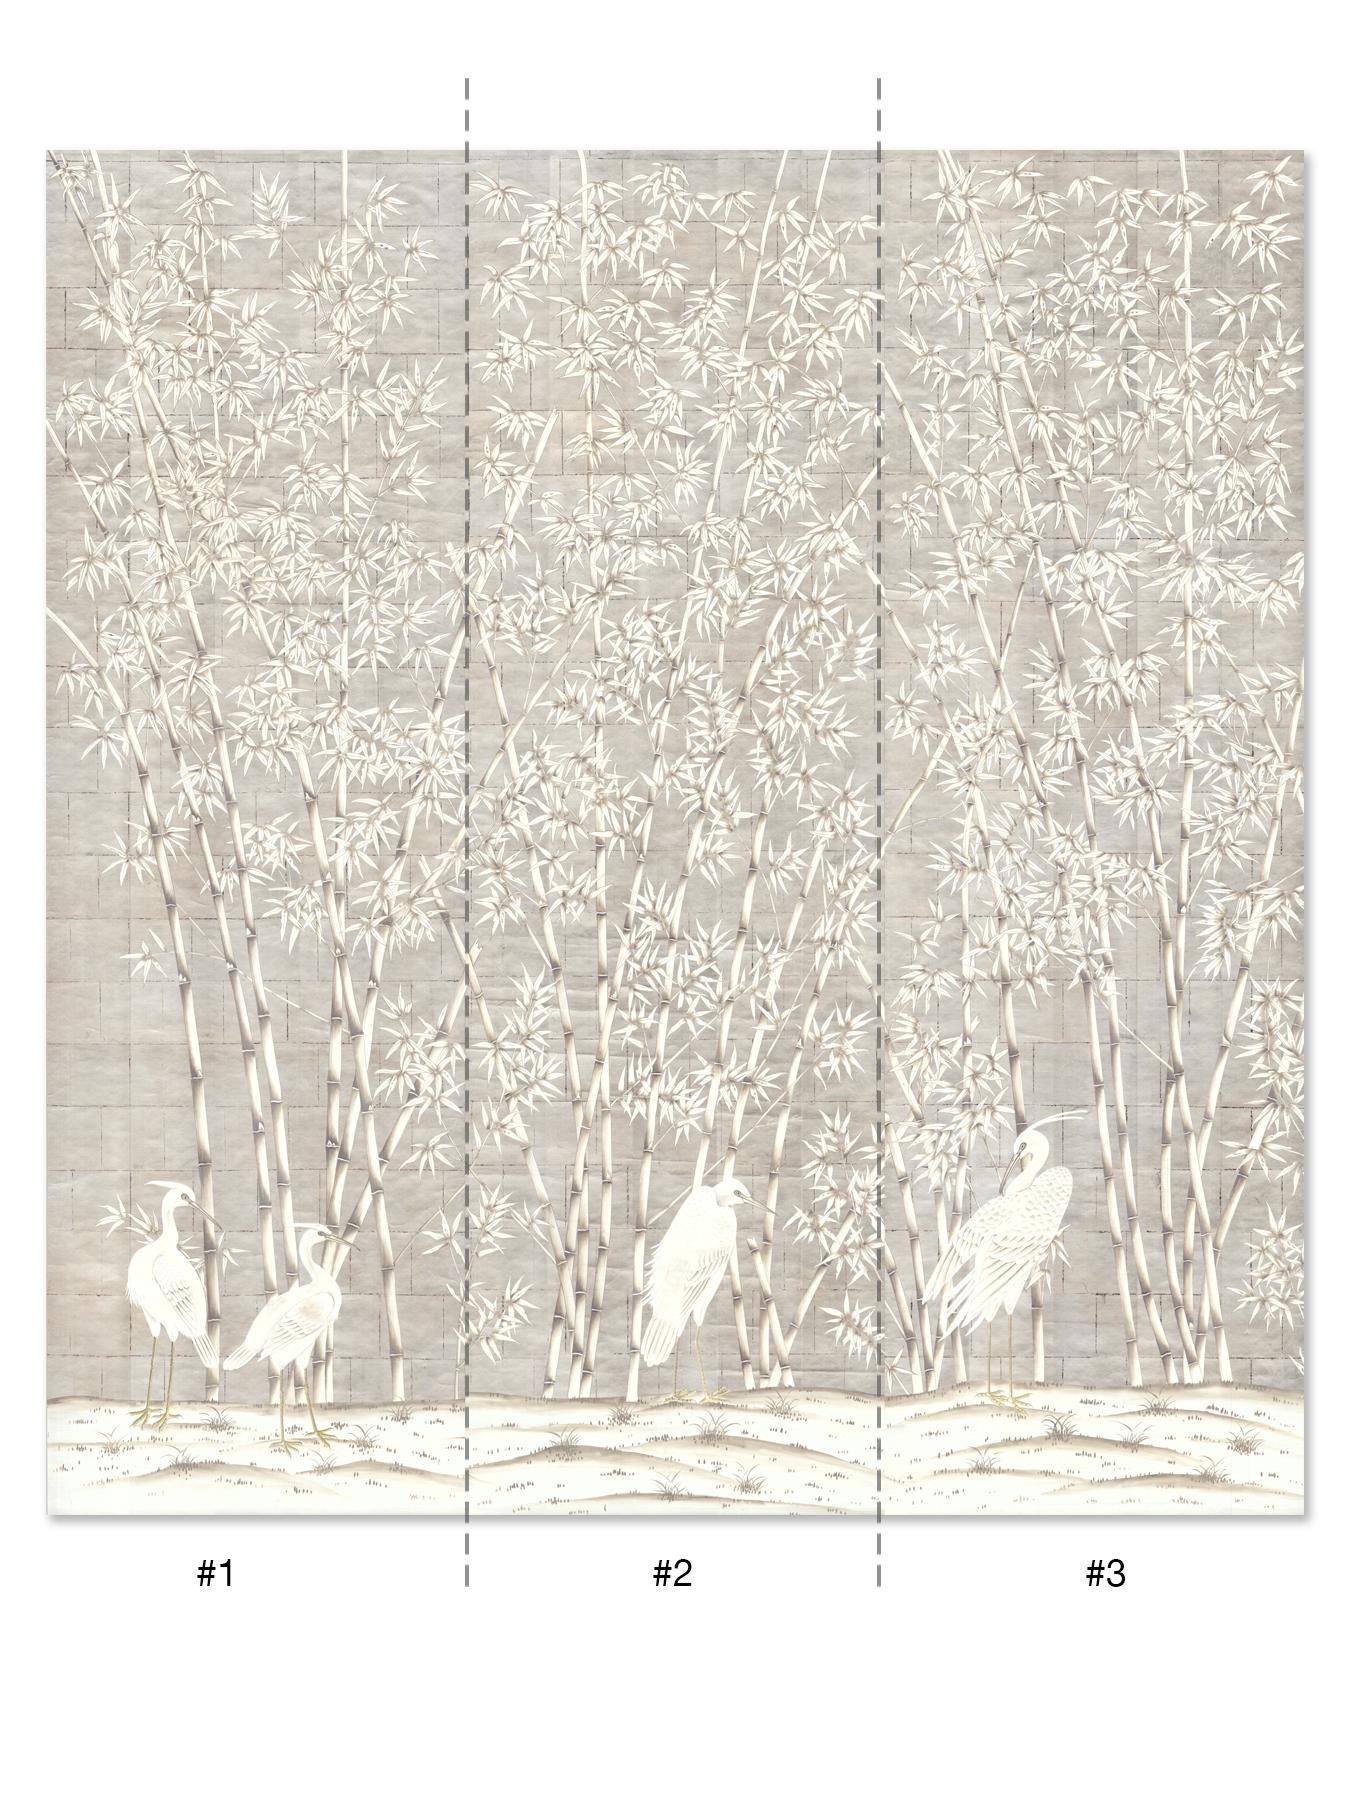 Bamboo and cranes is an exotic mural of bamboo trees with a group of majestic white cranes below. This mural is hand painted on silver metal leaf paper. The bamboo trees are delicately wrought in a warm antique white with grey highlights. The full